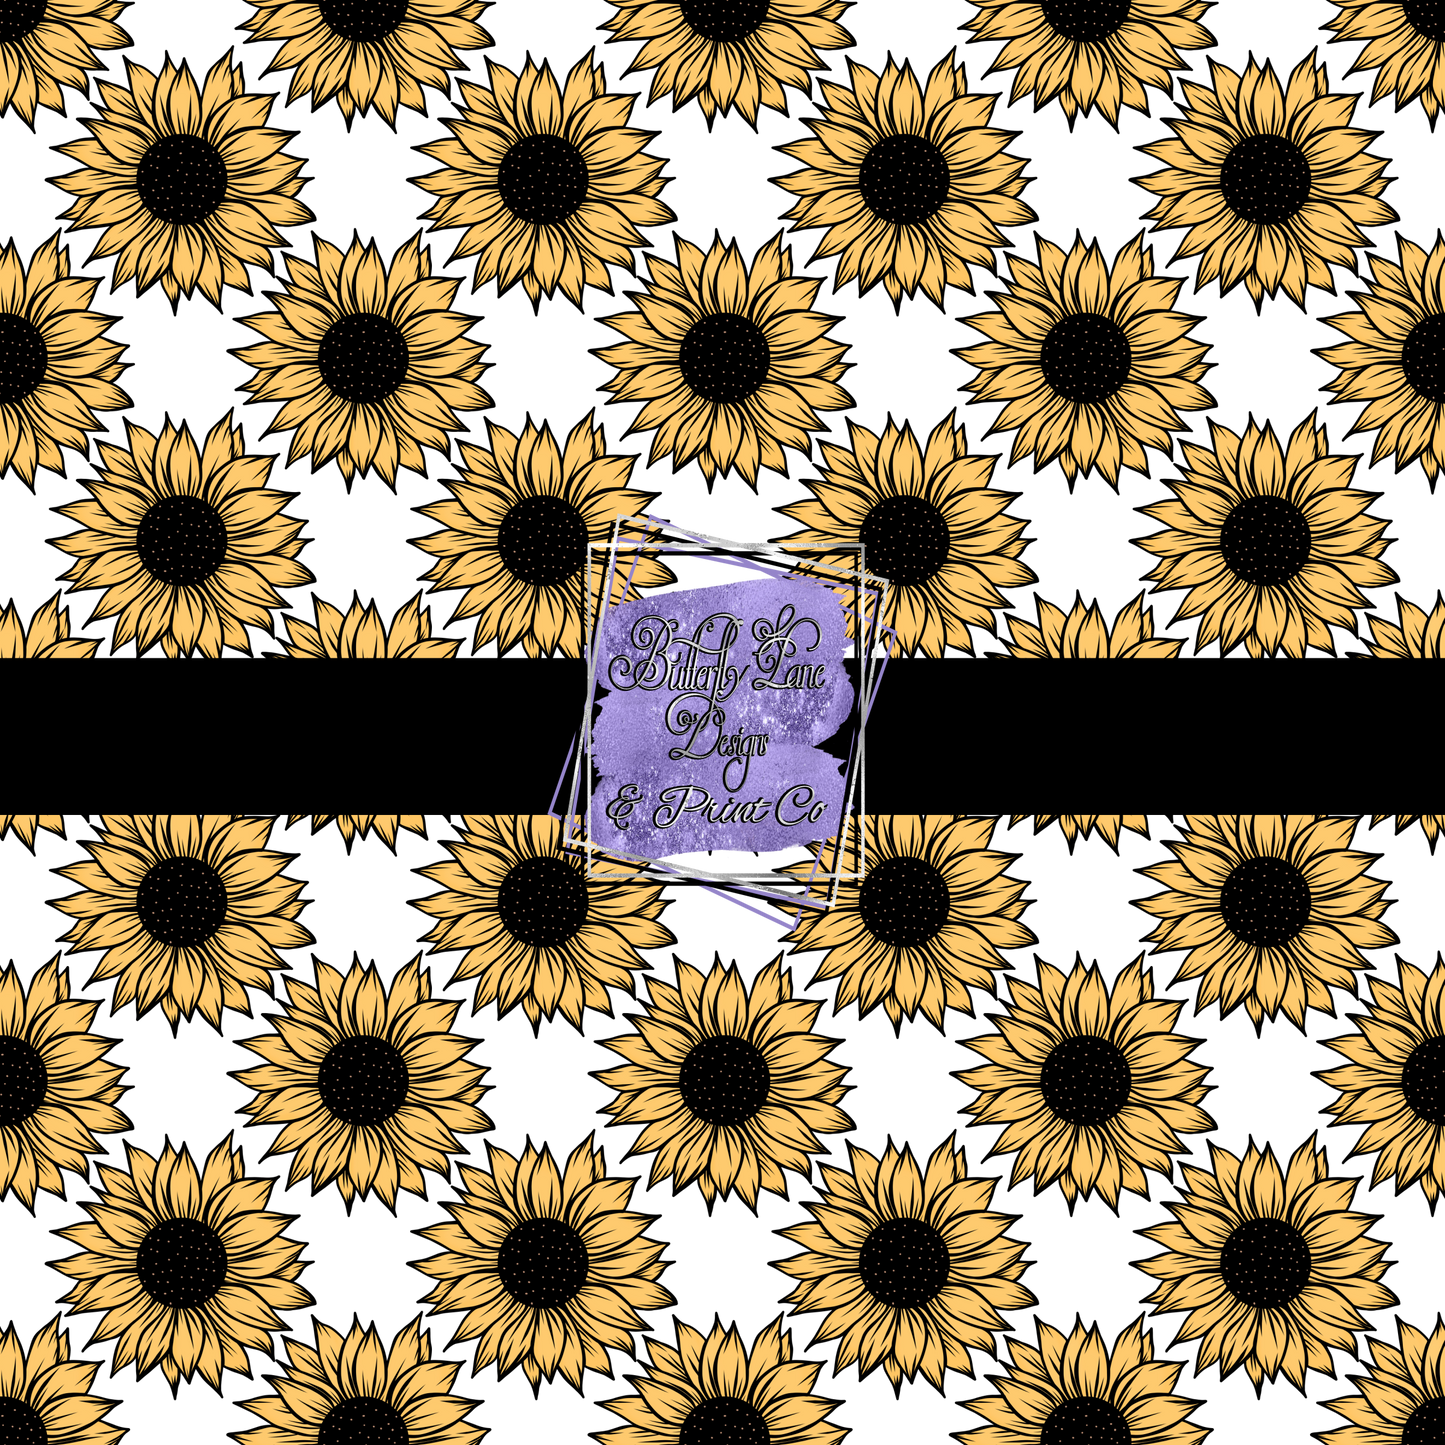 Sunflowers-Protect your peace PV 481- Patterned Vinyl